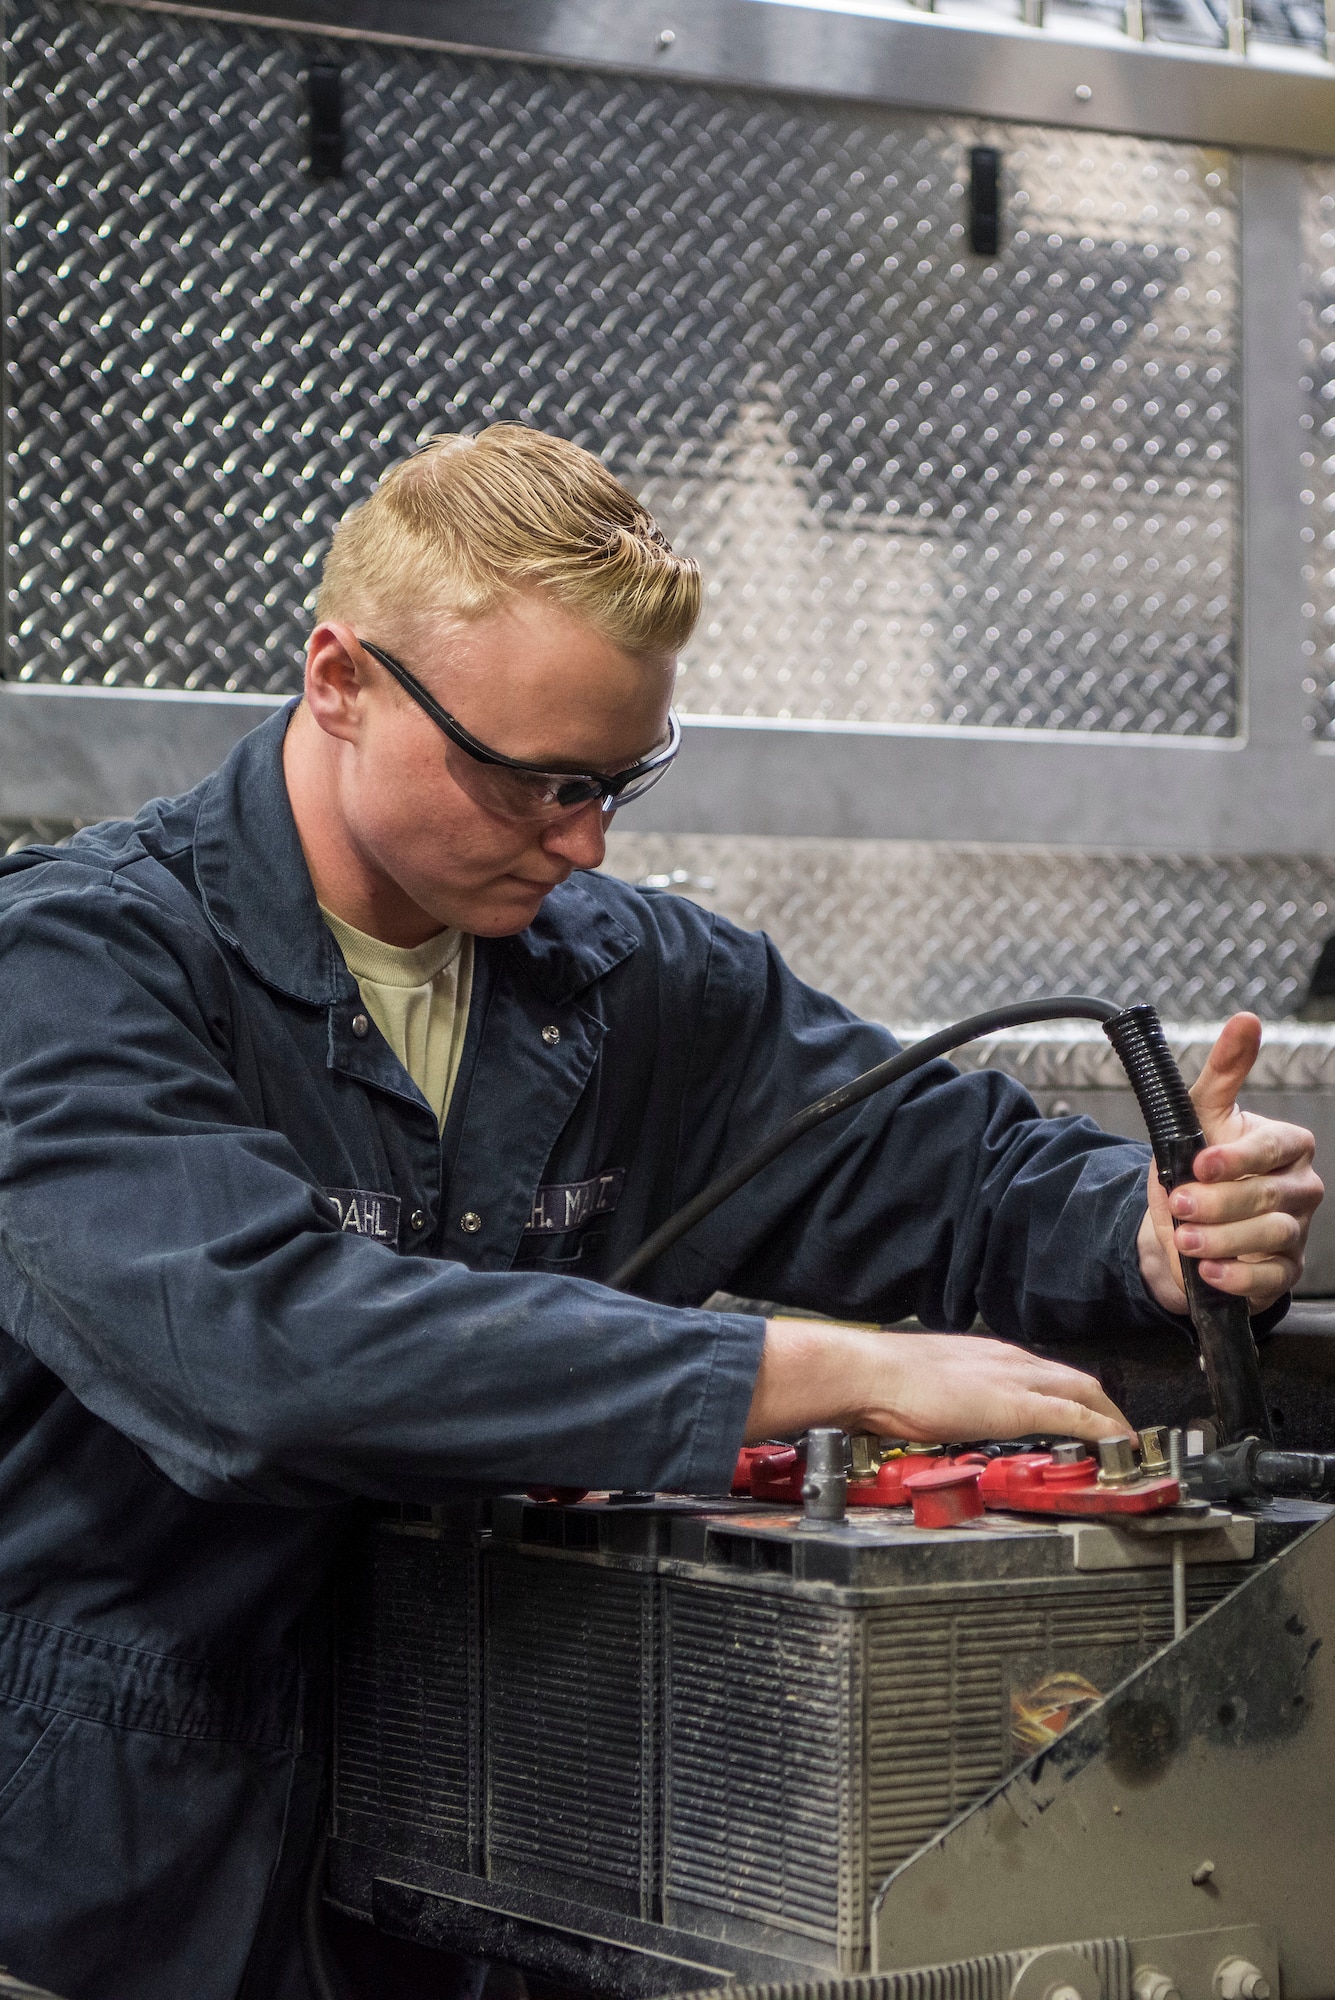 Airman 1st Class Shane Ousdahl, 673d Logistics Readiness Squadron fire truck and refueling mechanic, tests a fire truck battery at Fire Station 1 on Joint Base Elmendorf-Richardson, Alaska, Sep. 17, 2018. Fire truck and refueling mechanics perform daily care on fire trucks while also following monthly and yearly maintenance checklists.